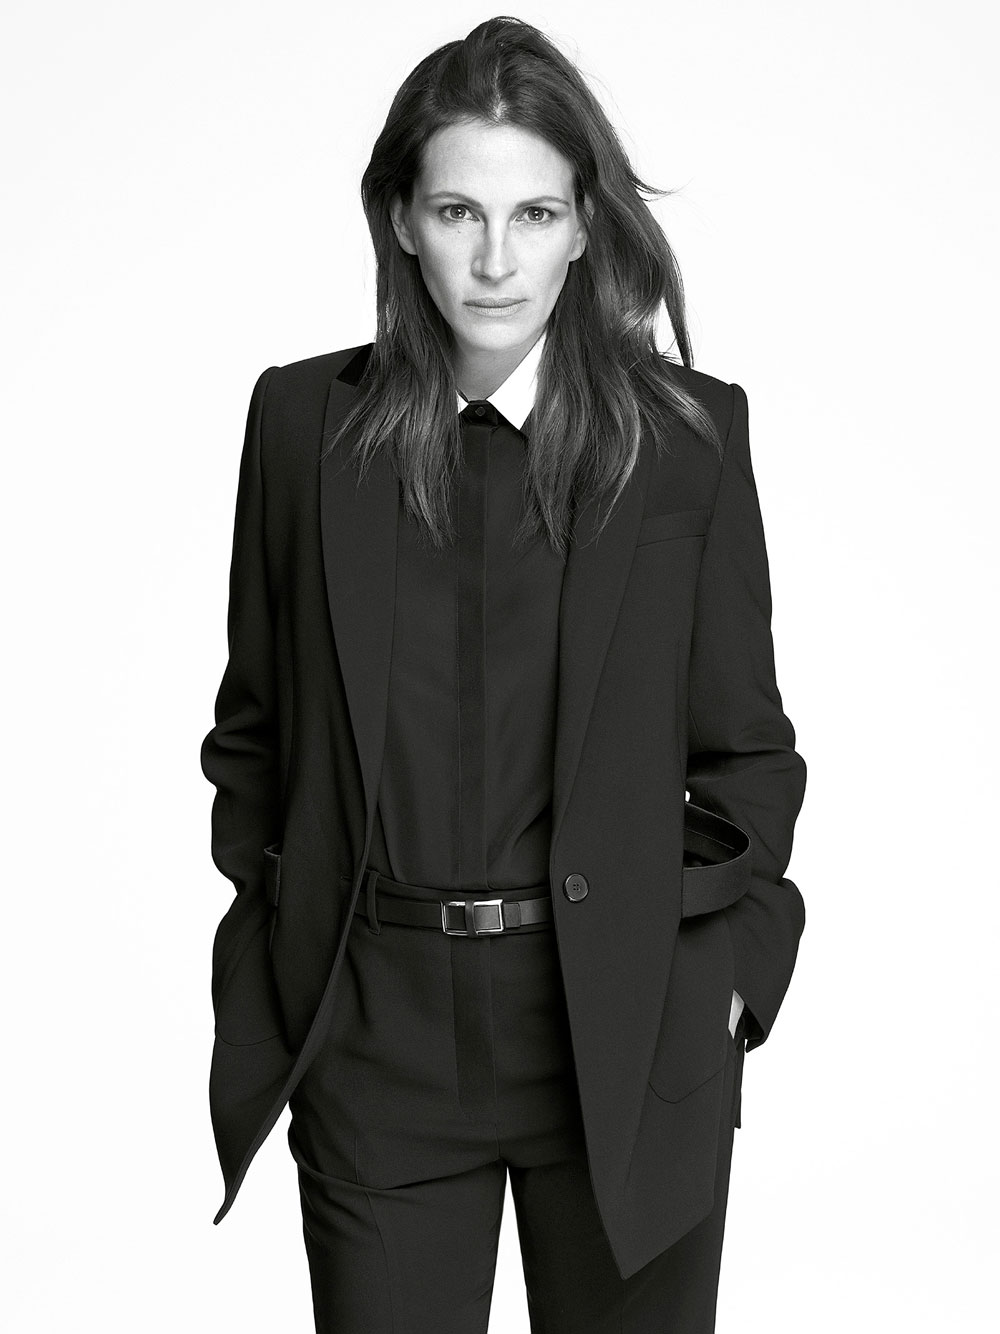 Julia-roberts-GIvenchy-Spring-Summer-2015-Campaign-Tom-Lorenzo-Site-TLO (1)